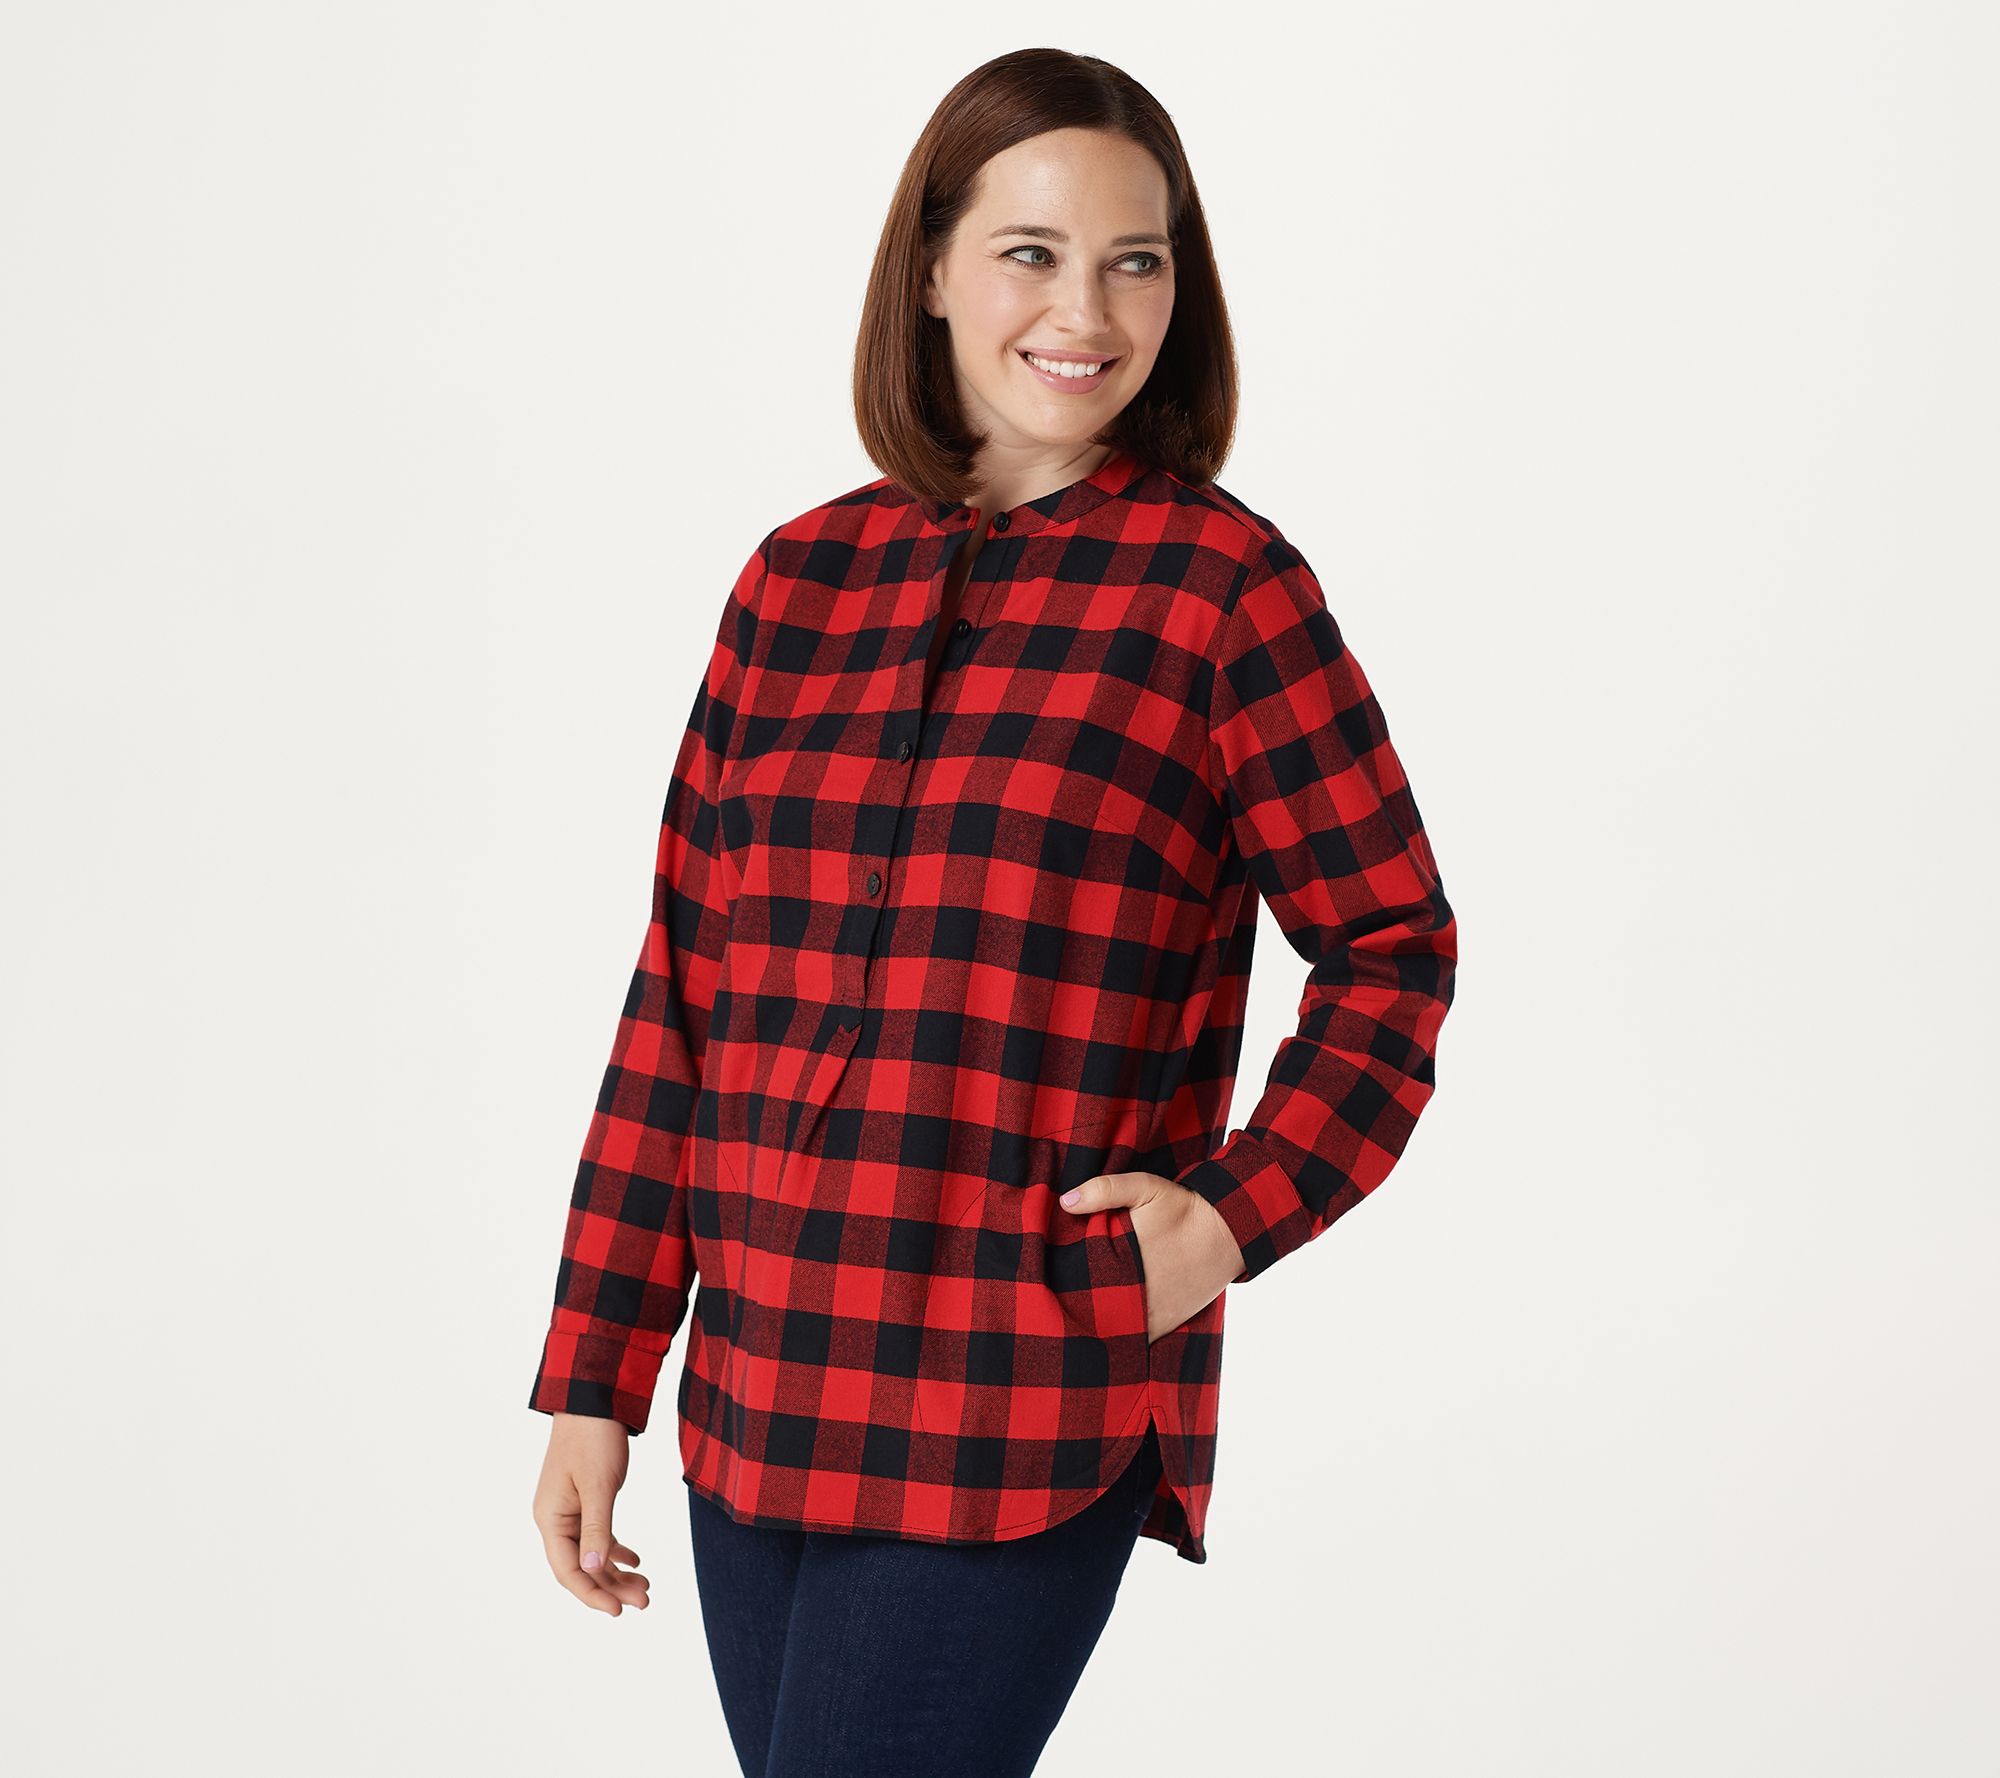 Buffalo Plaid - The Return of the Trend that was Never Gone